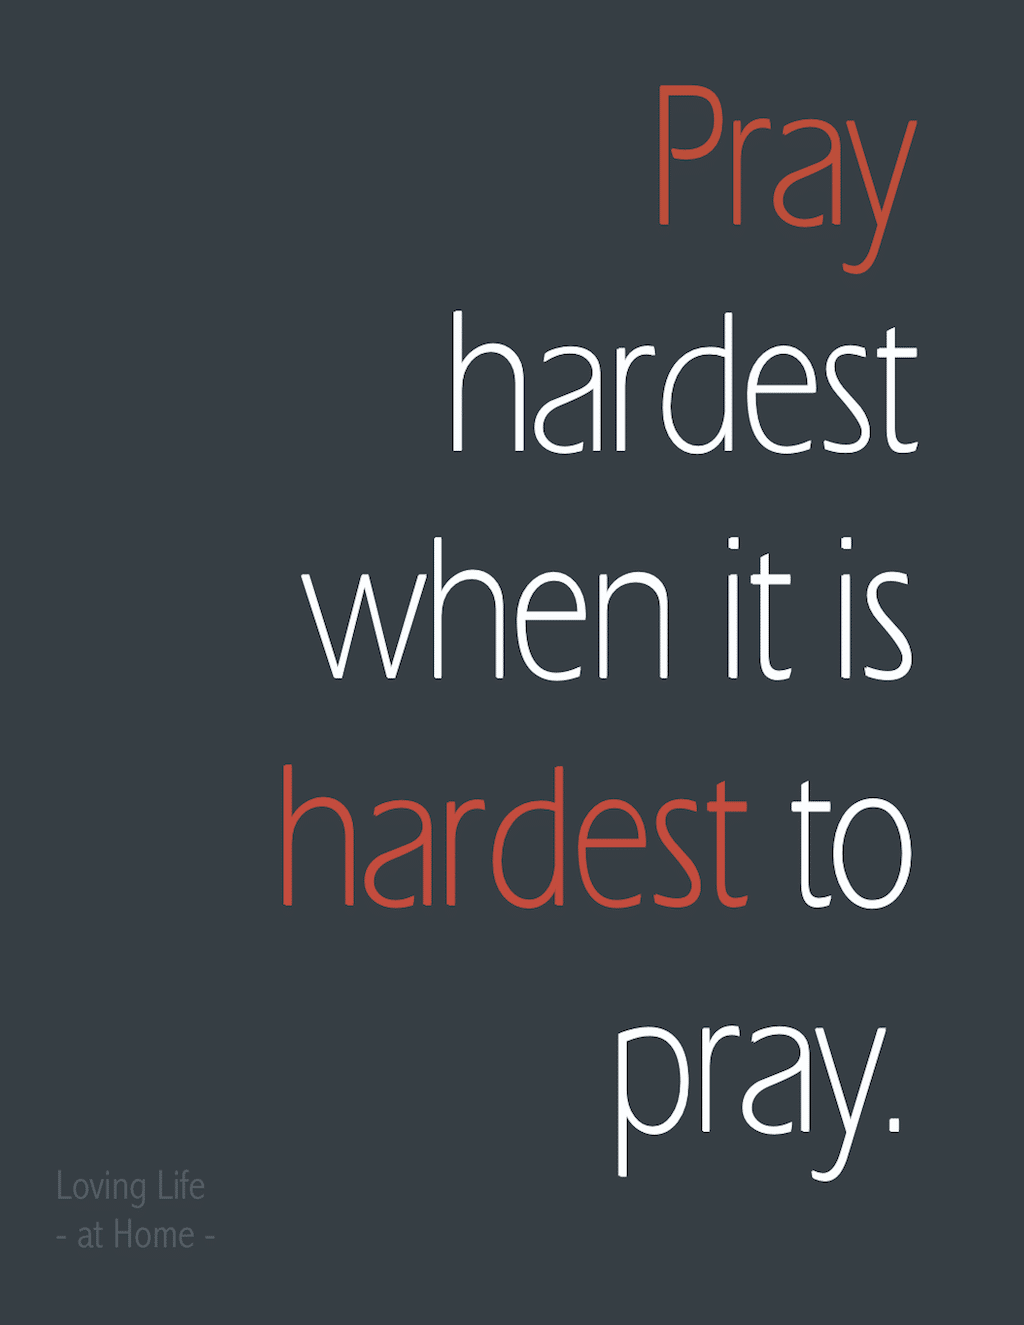 A Reminder to Pray — Even When It’s Hard